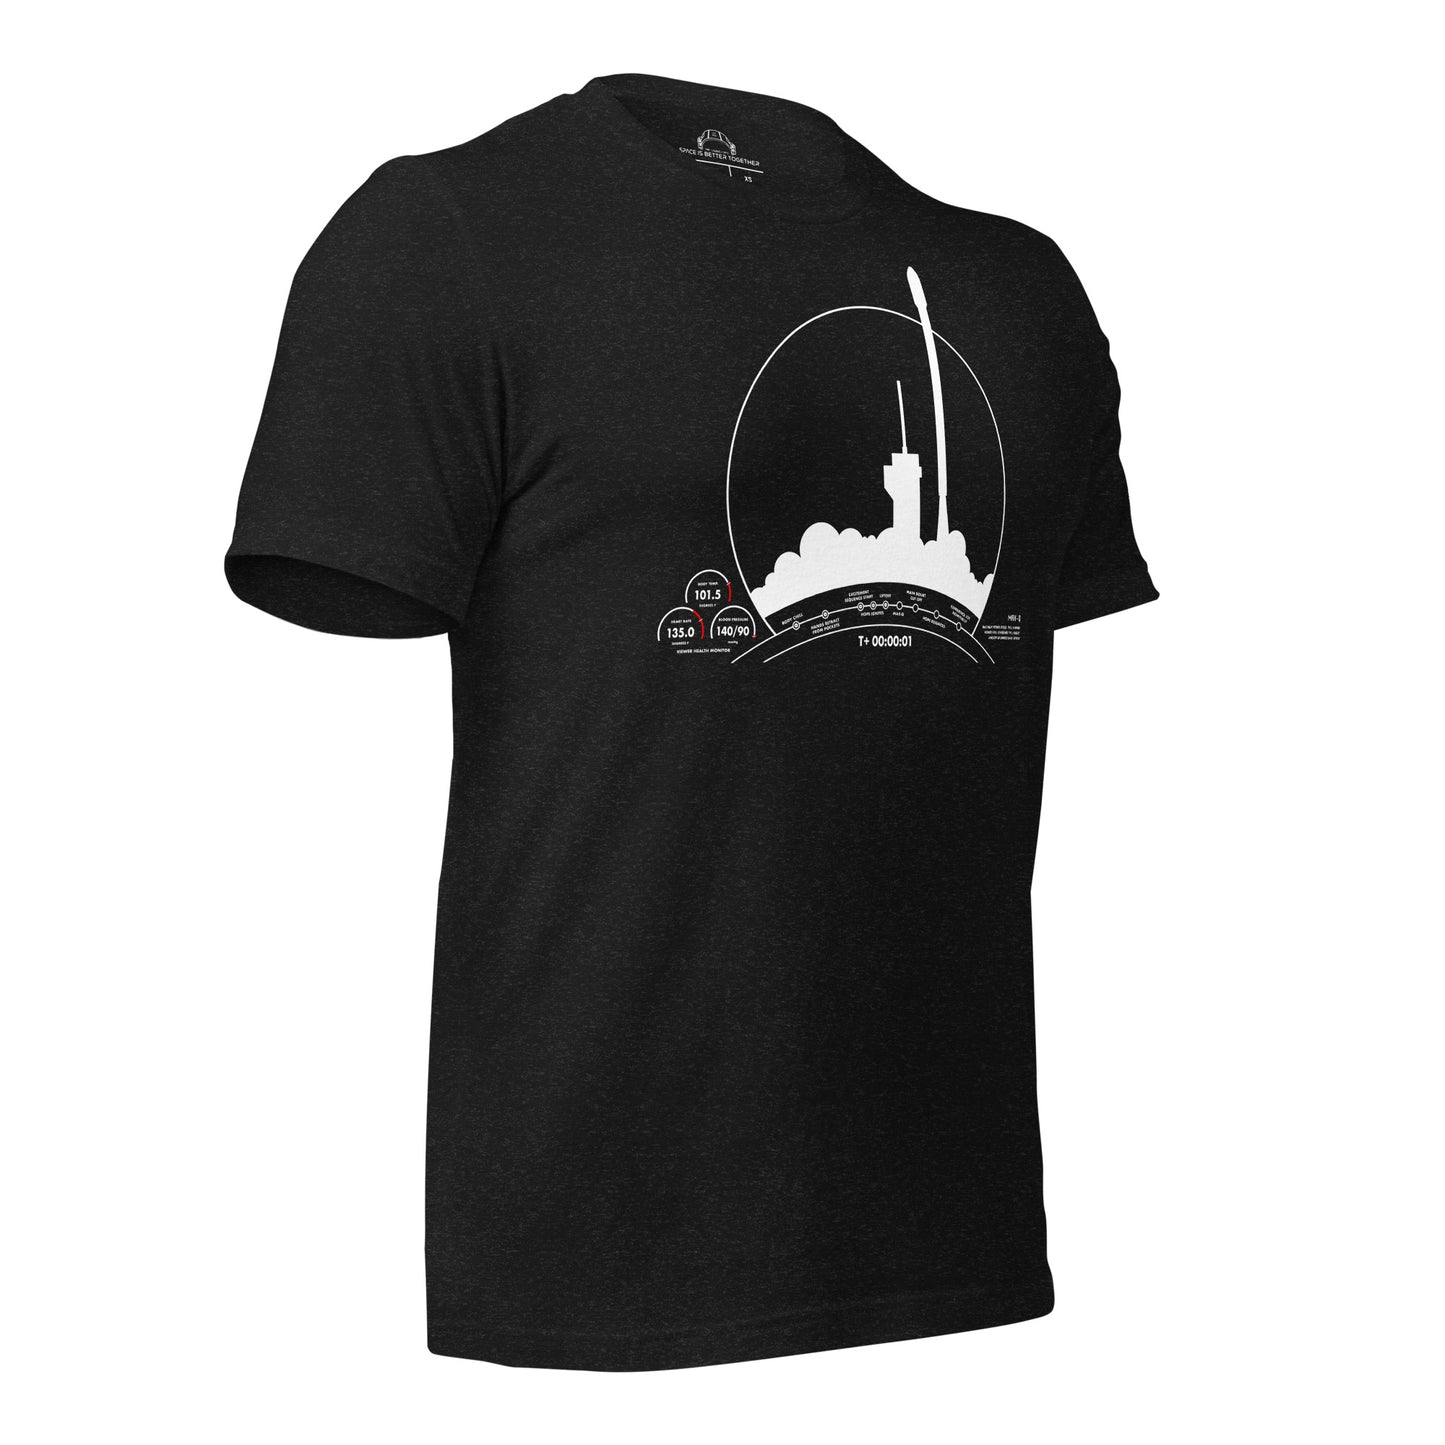 Falcon 9 Launch Experience Tee